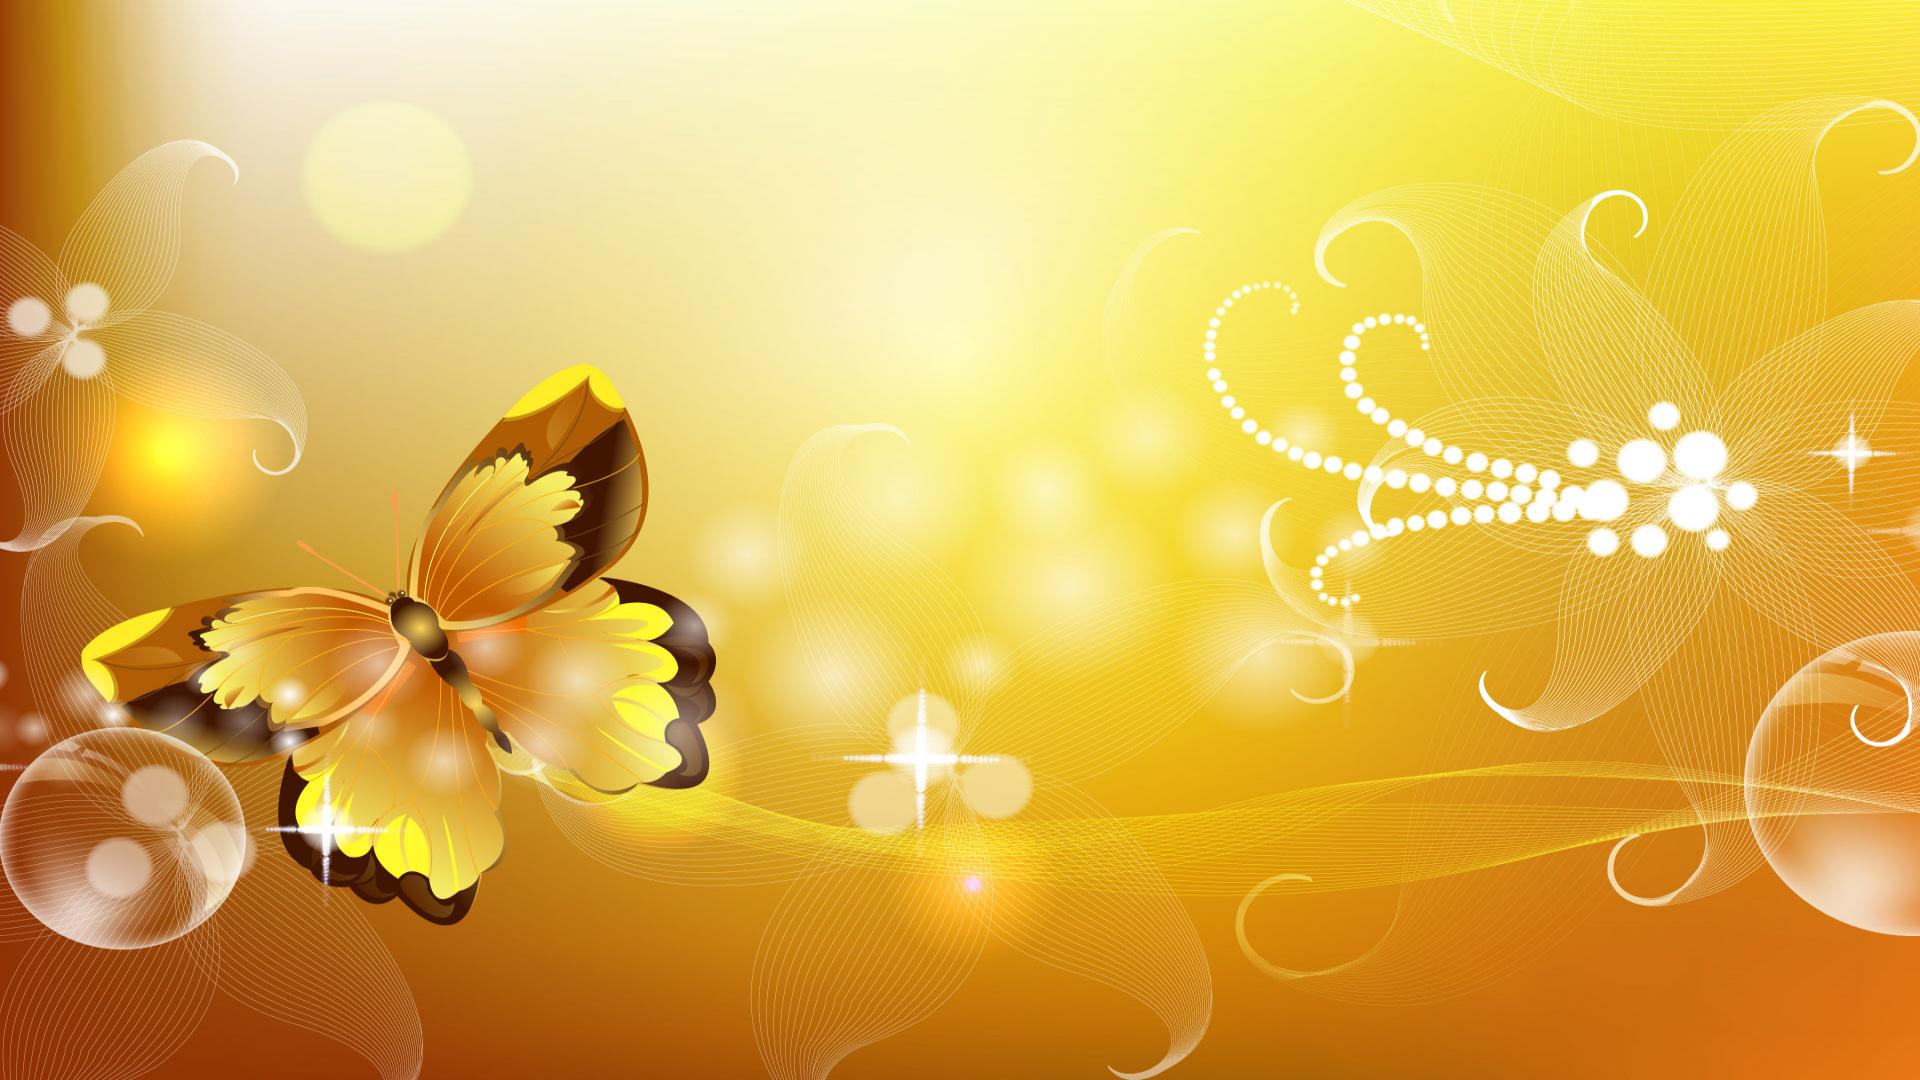 Yellow Wallpapers - Yellow Background With Butterflies - HD Wallpaper 